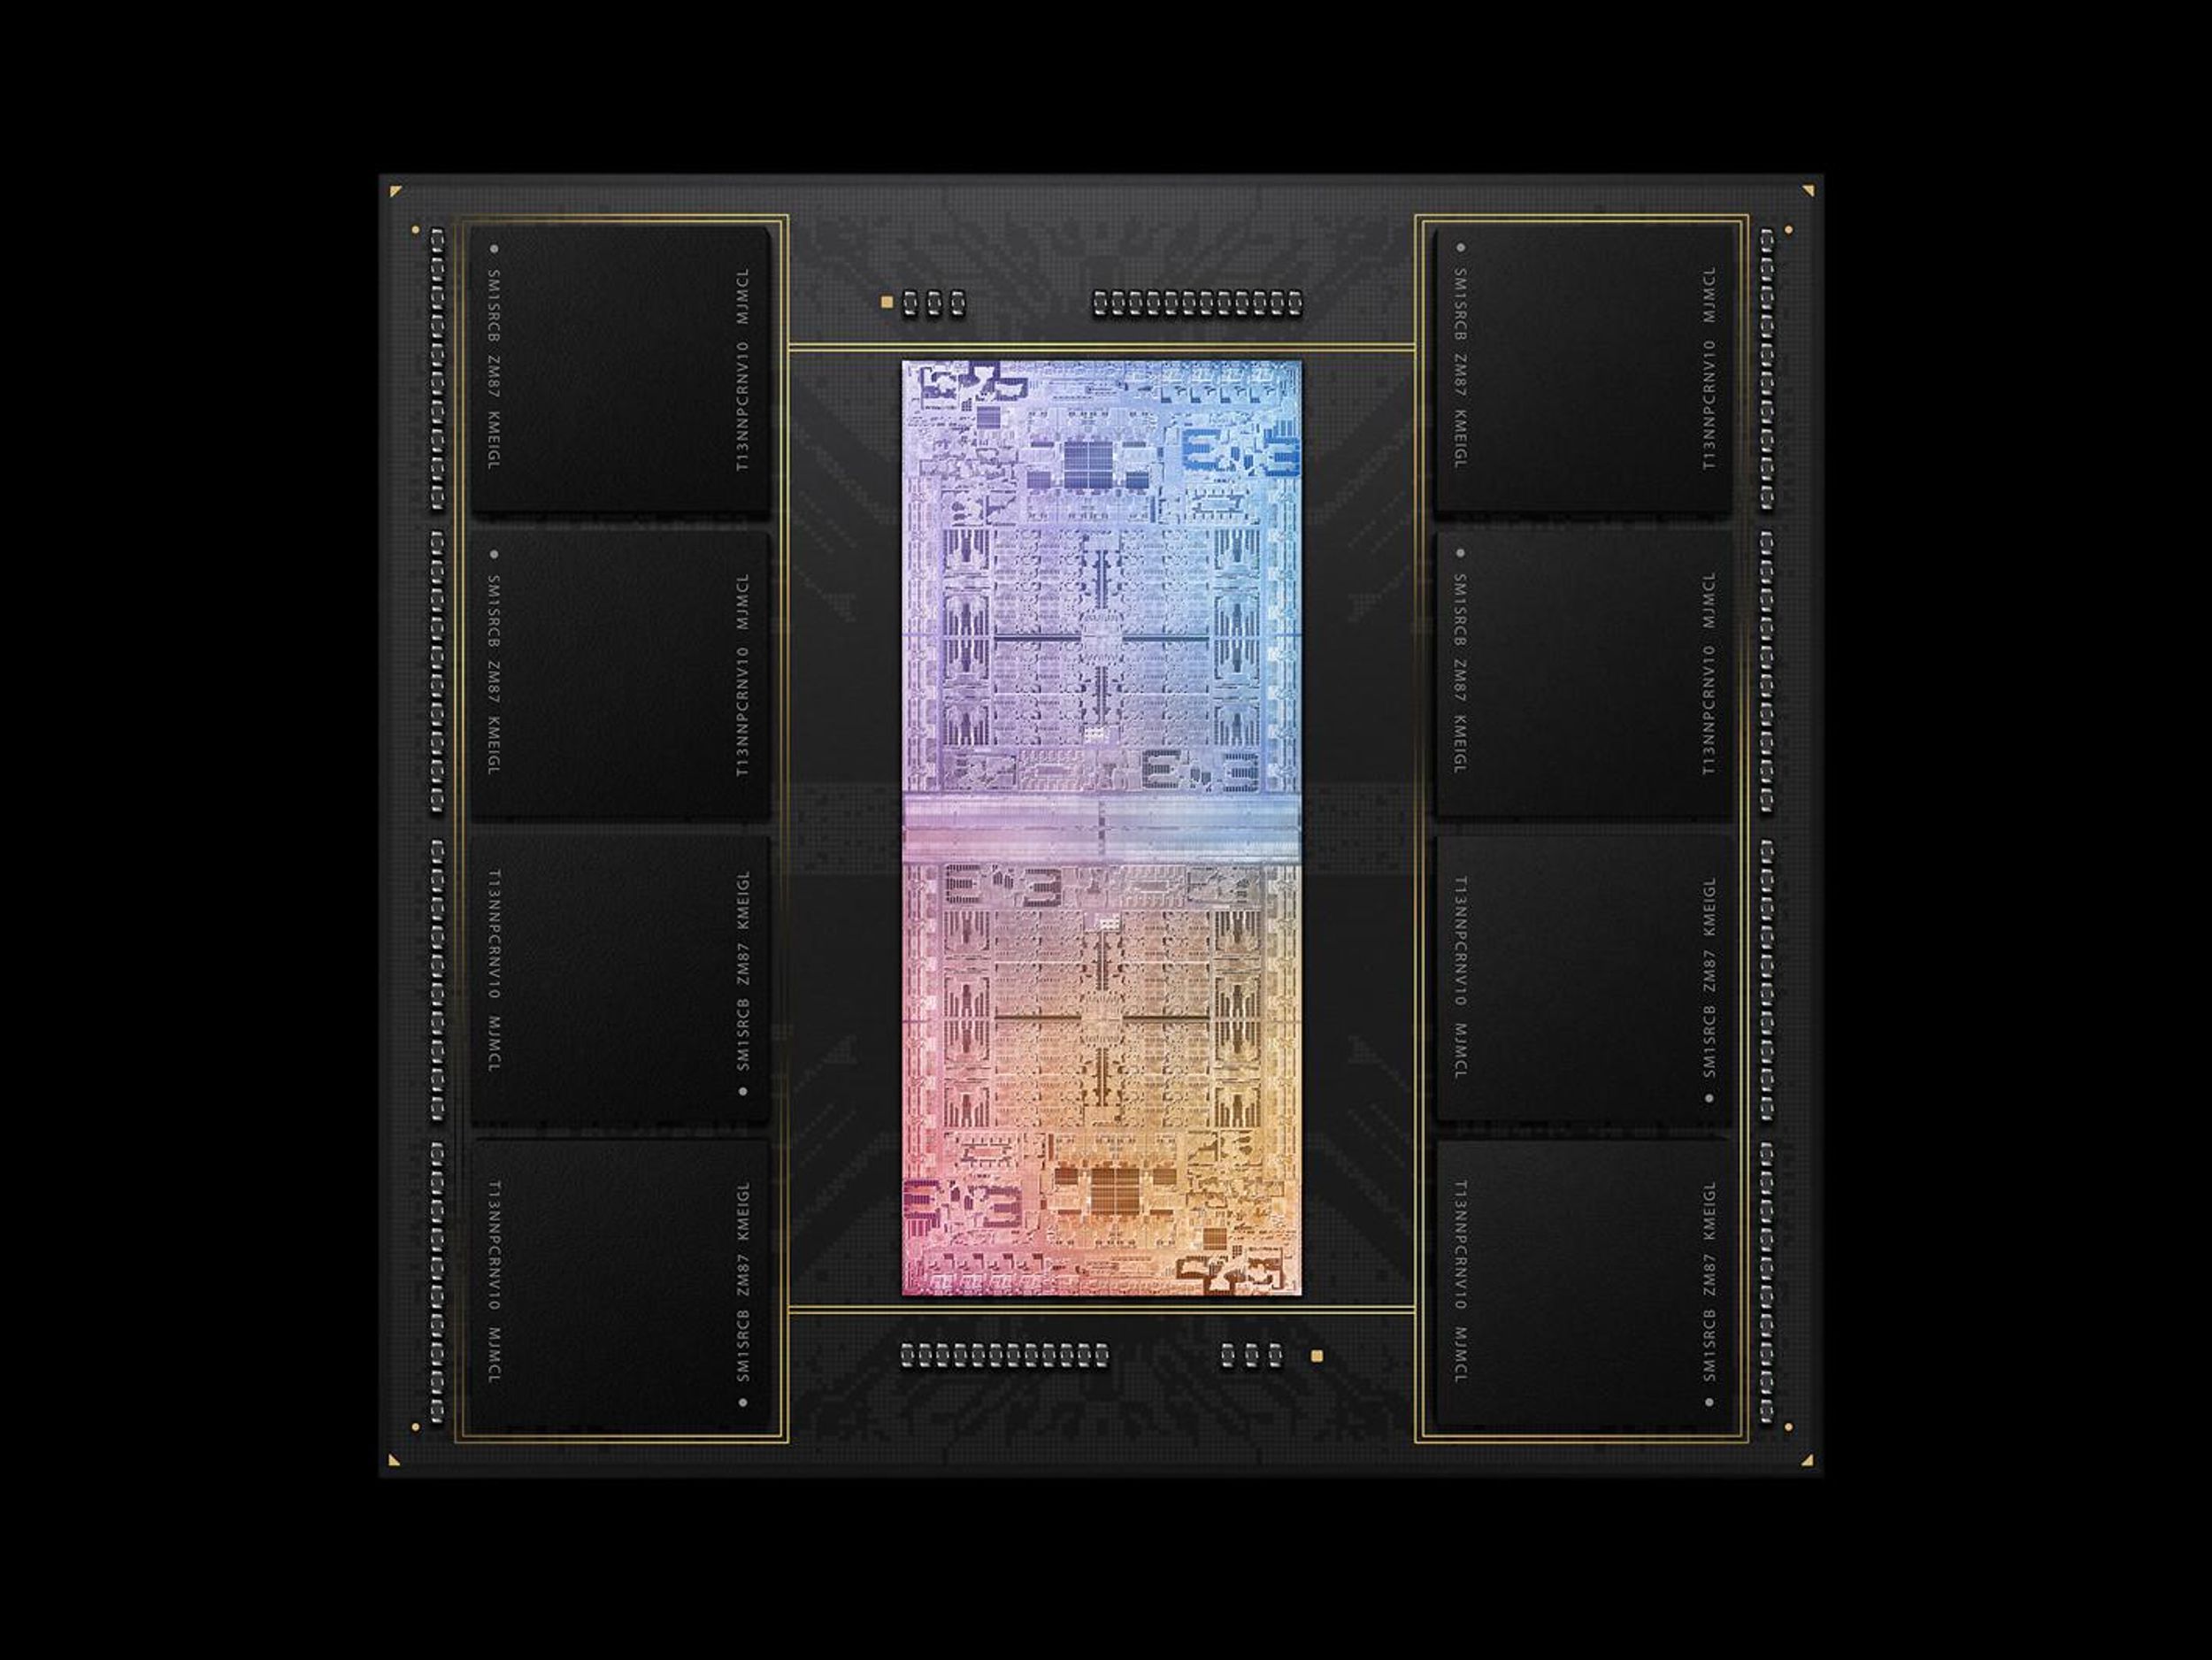 A flat black square with two iridescent computer chips connected in the middle